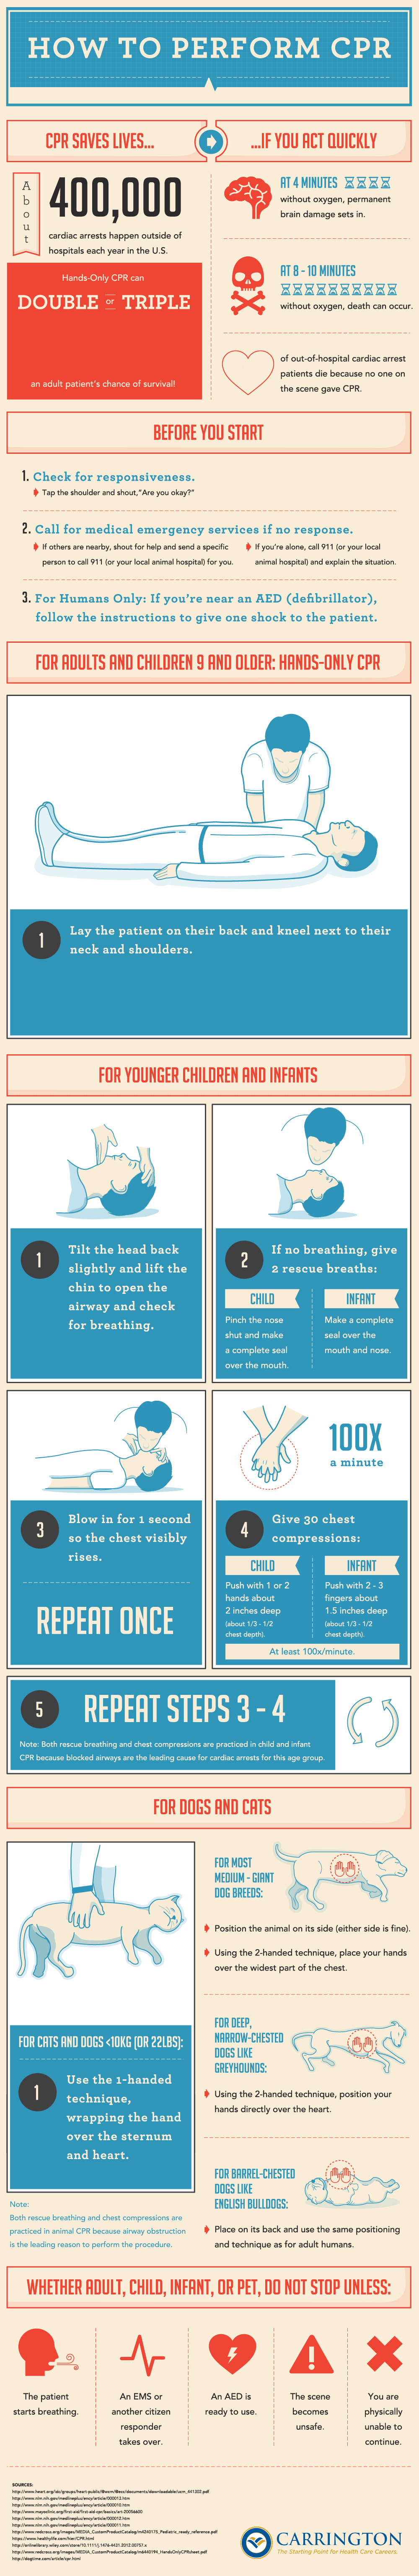 An Animated Guide to Perform CPR  Infographic